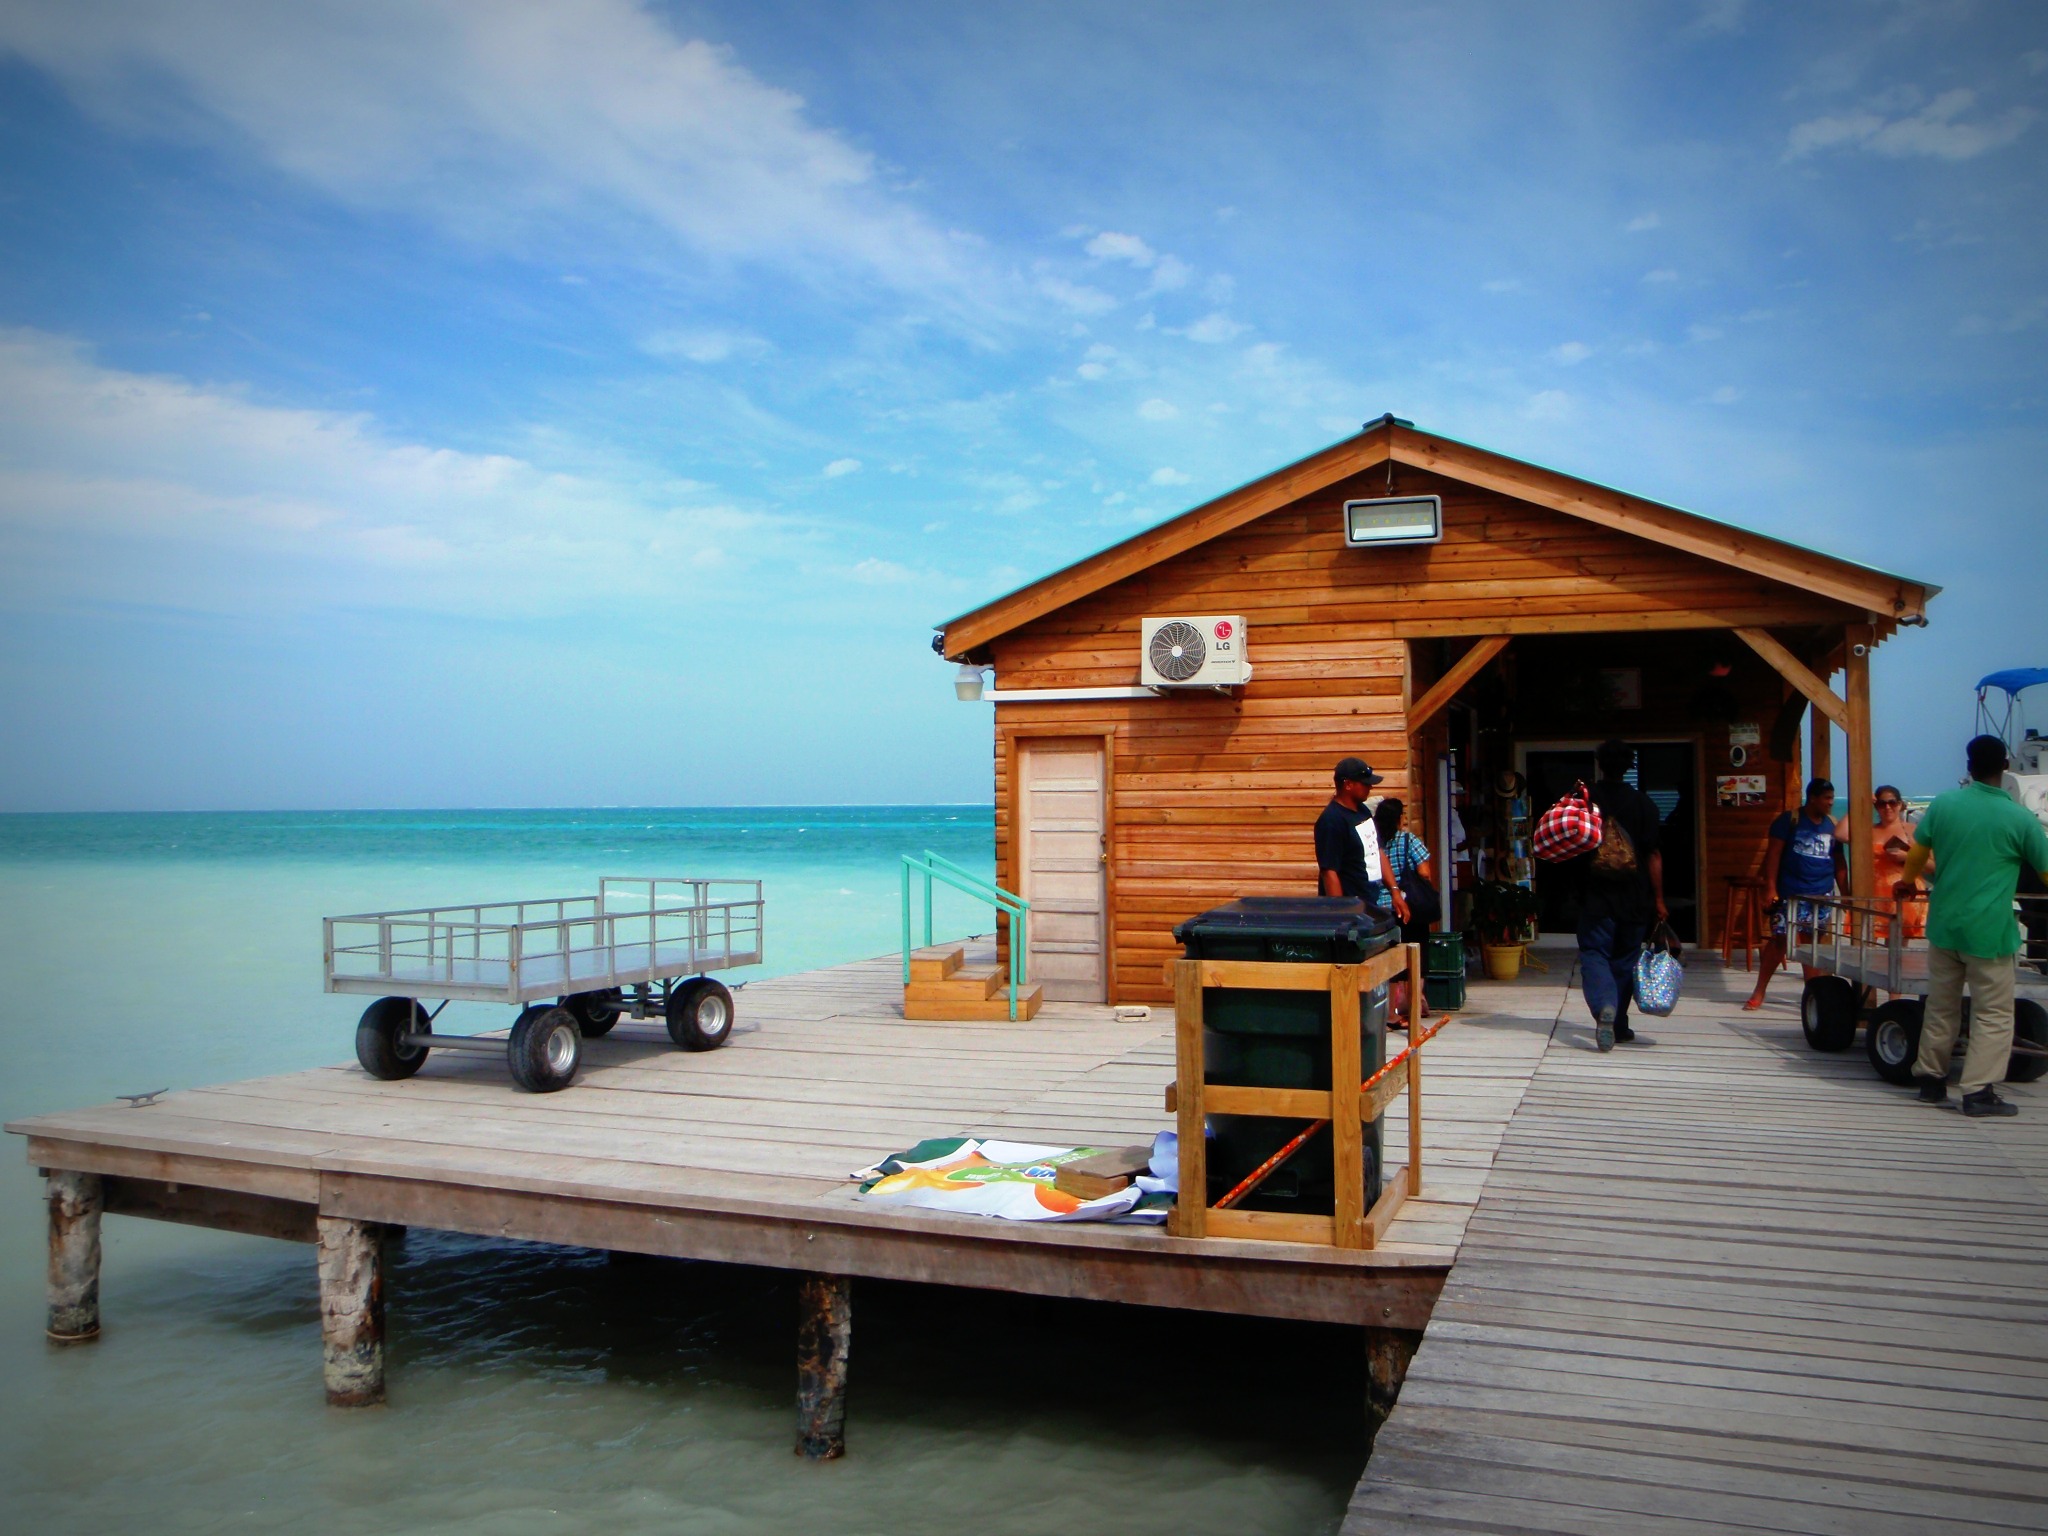 Getting to Caye Caulker-Part 2